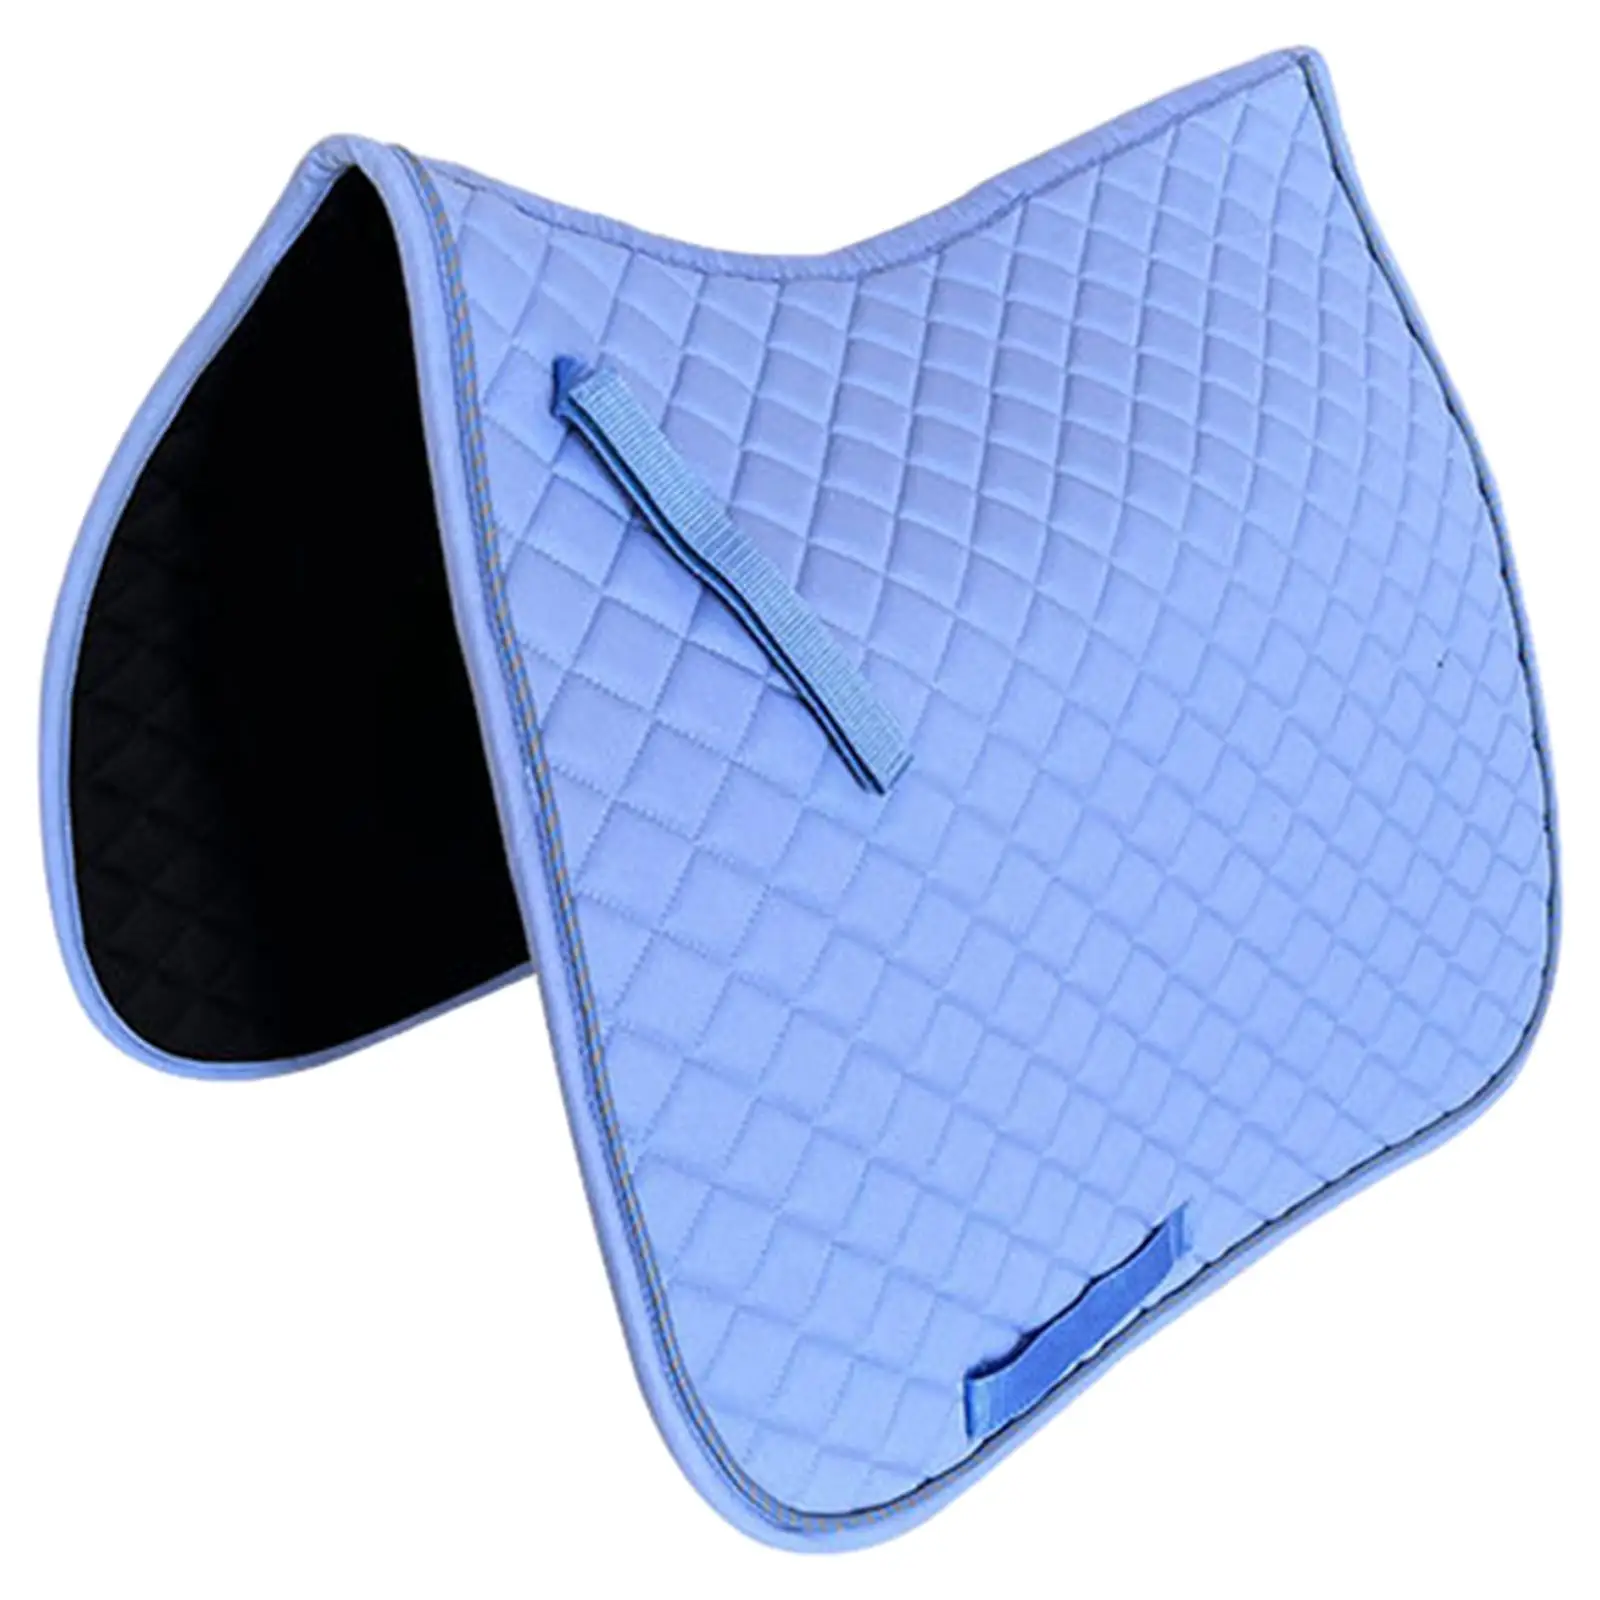 Horse Saddle Pad AntiSlip Comfortable Equestrian Riding Equipment Protect Thighs Sports Thickened Seat Cushion Shock Absorbing